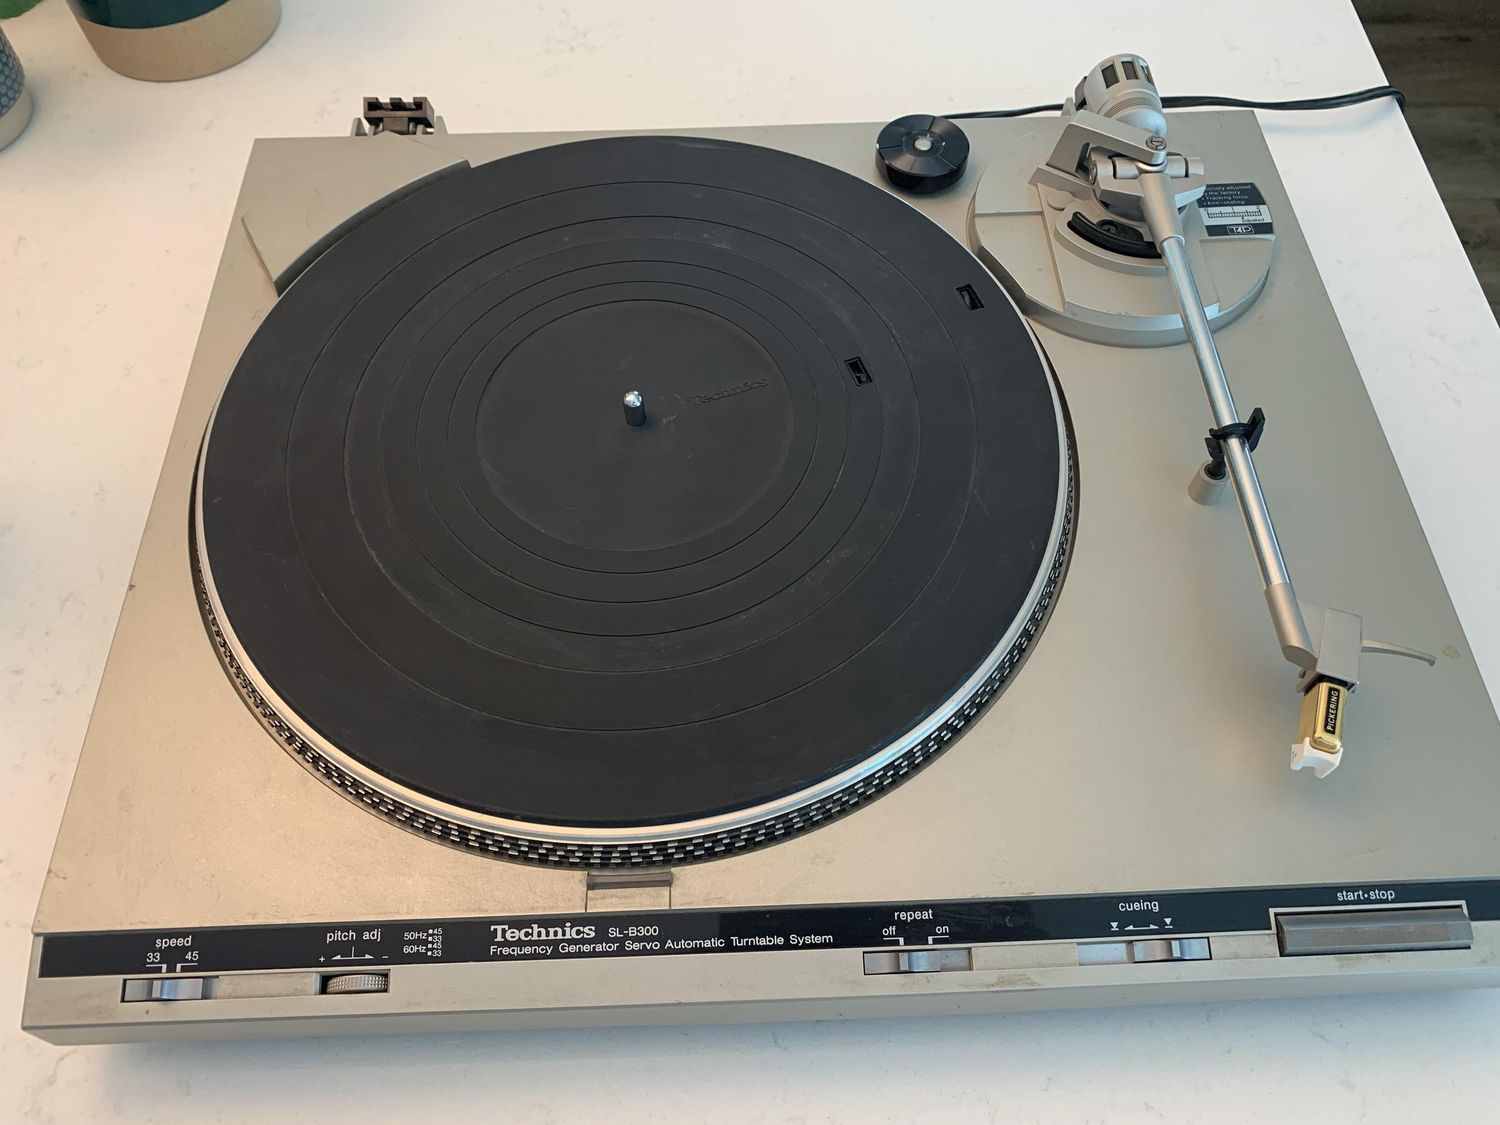 I Have An Old Turntable With Analog Audio Wire, How Can I Put It Into 3.5 Mm Wire